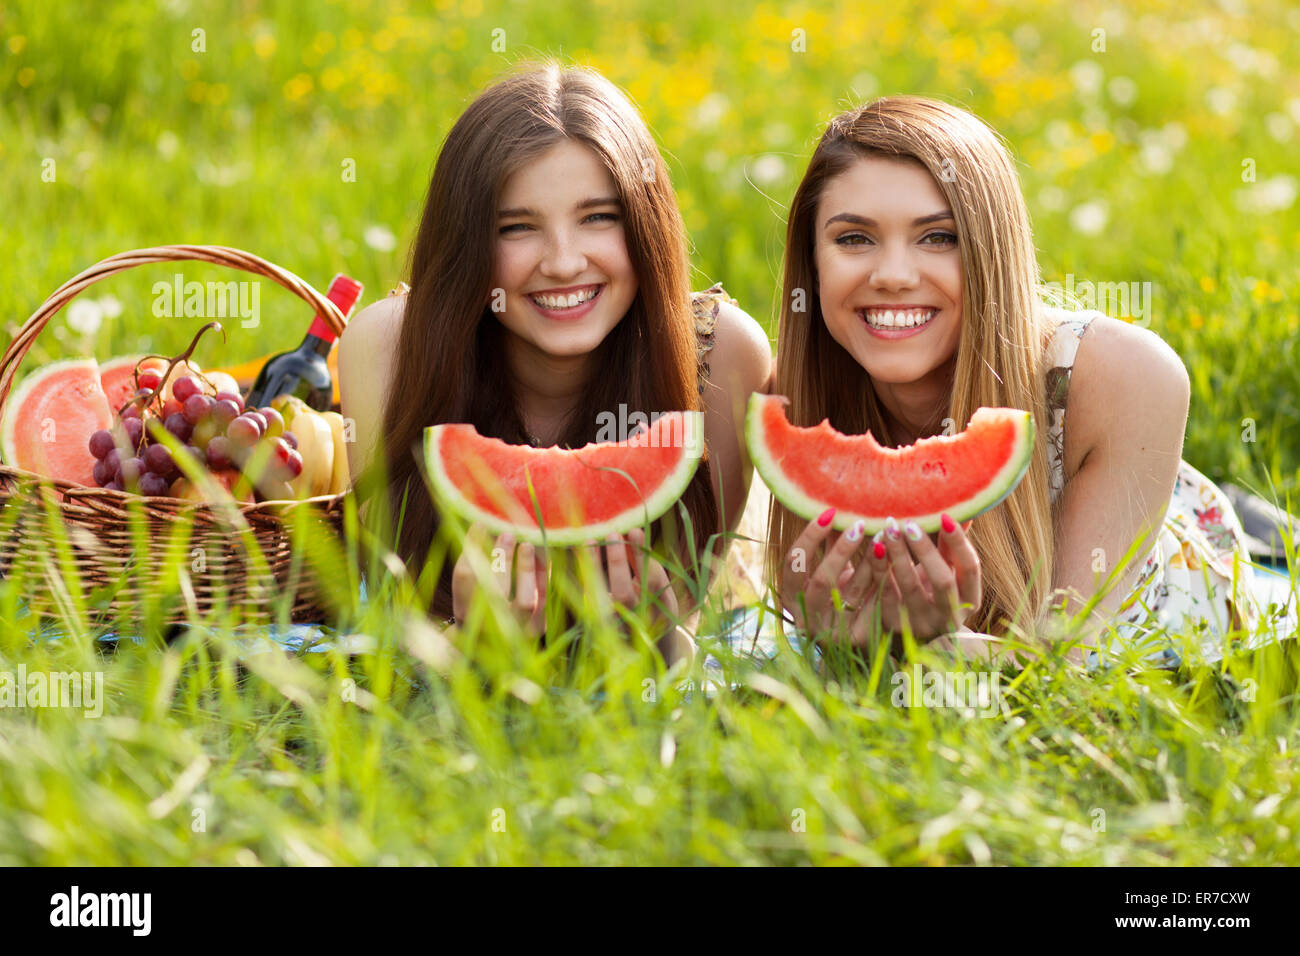 Two beautiful young women on a picnic Stock Photo